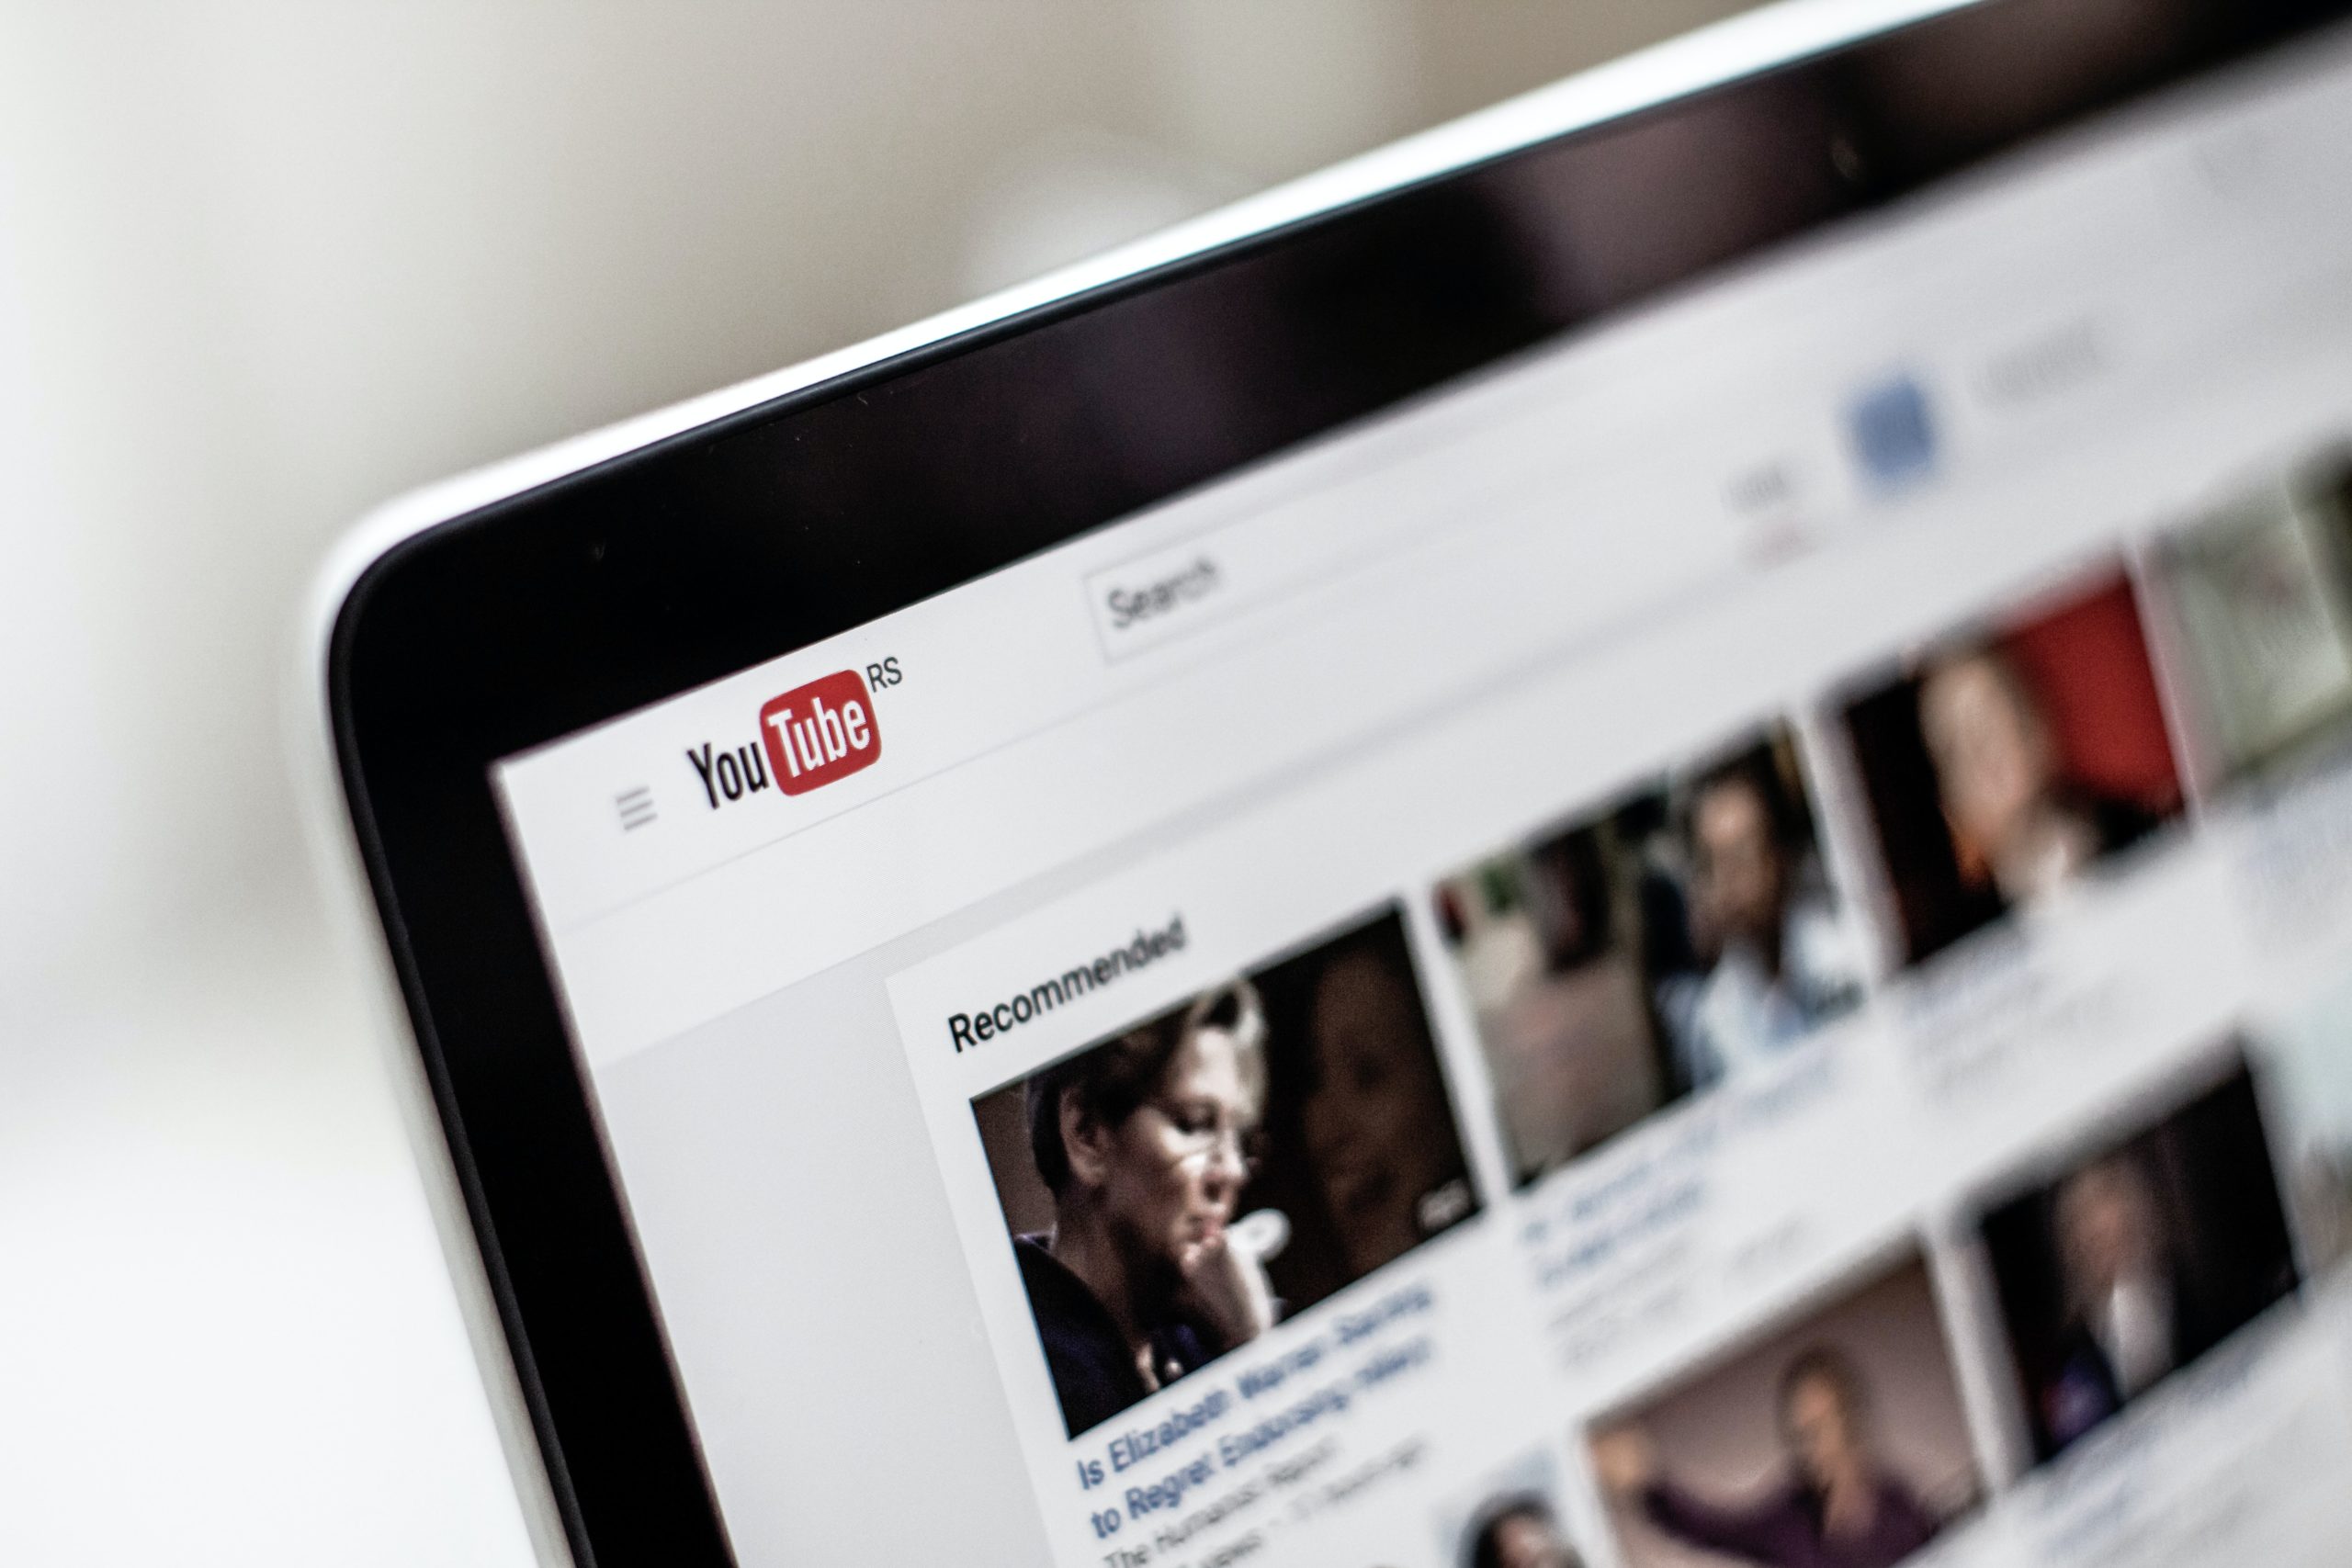 a photograph of youtube home screen on a computer